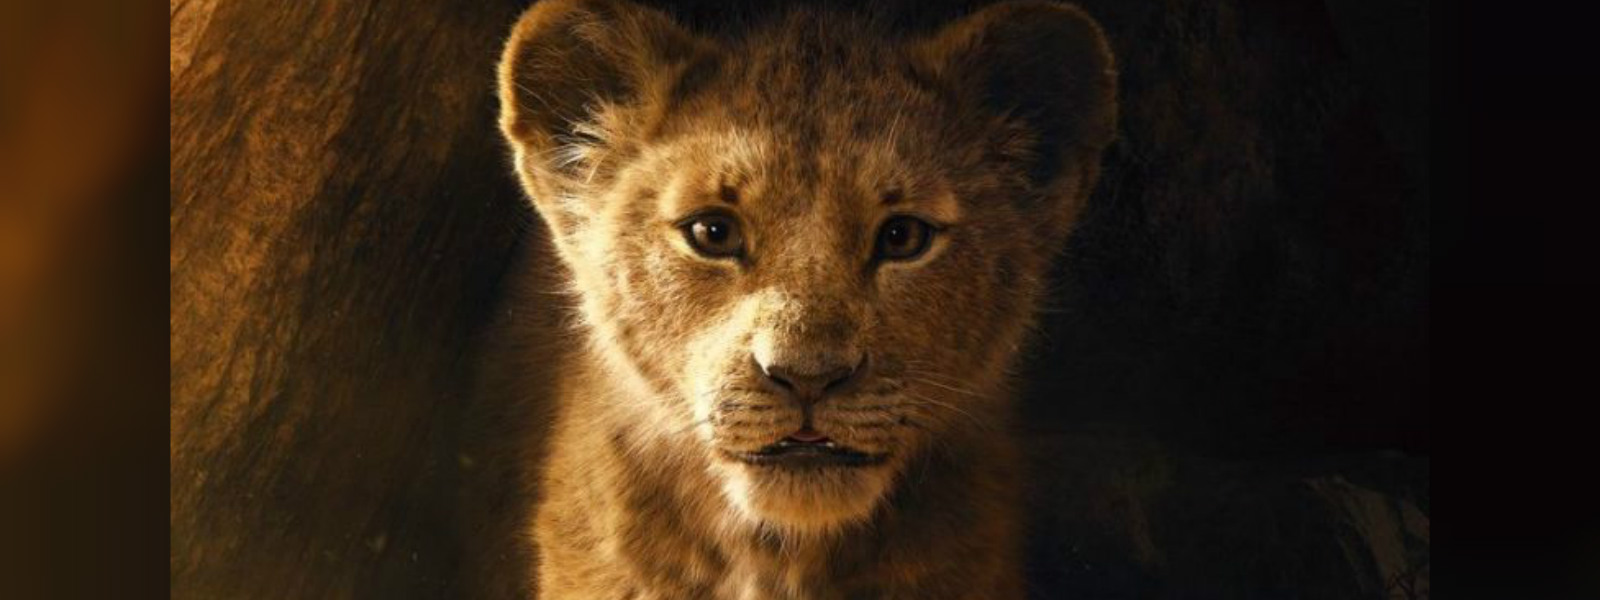 First trailer for Disney's 'The Lion King' lands